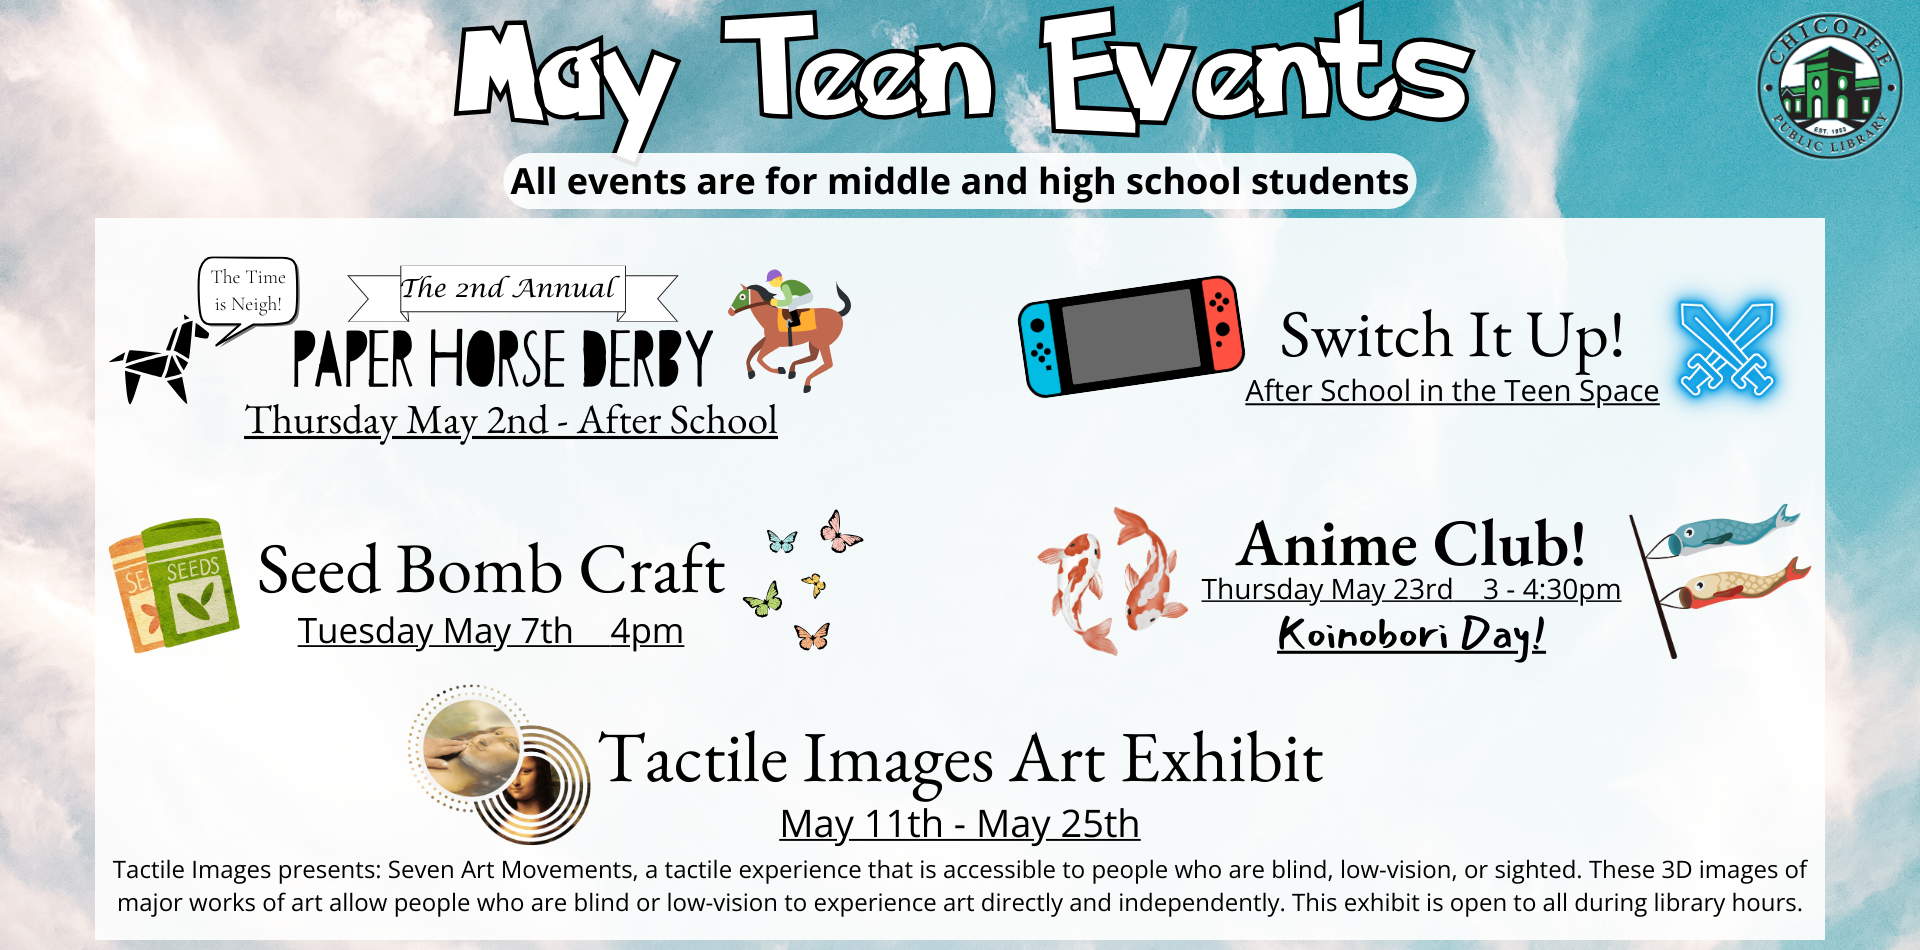 May '24 Teen Events - May Teen Events All events are for middle and high school students Stop by the library afterschool and enjoy the library’s Nintendo Switch! We have a lot of fun games to play with your friends and fellow library teens! Switch It Up! After school in the Teen Space *Please note: Switch is dependent on library staff availability and may not be out every day* Paper Horse DerbyThursday May 2nd - After School Stop by the Teen Space after school to cut out and create your own tiny paper horse! These little friends will then compete in their own Kentucky Derby to see who made the fastest one. Best part? No skill is required and they'll race entirely on their own! All brought to you by the power of PHYSICS! The Time is Neigh! Anime Club! Thursday May 23rd 3 - 4:30pm The 2nd Annual Koinobori Day! Have you ever seen large, koi fish windsocks and wondered what they were for? Join us as we learn a little about these iconic decorations and then get to make our own colorful koi! Seed Bombs Tuesday May 7th 4pm Stop by the Children’s Room for this unique craft where you’ll get to take shredded paper (it’s biodegradable!) and combine it with flower seeds to create a fun, environmentally friendly way to plant some flowers! Tactile Images Art Exhibit May 11th - May 25th Tactile Images presents: Seven Art Movements, a tactile experience that is accessible to people who are blind, low-vision, or sighted. These 3D images of major works of art allow people who are blind or low-vision to experience art directly and independently. This exhibit is open to all during library hours.